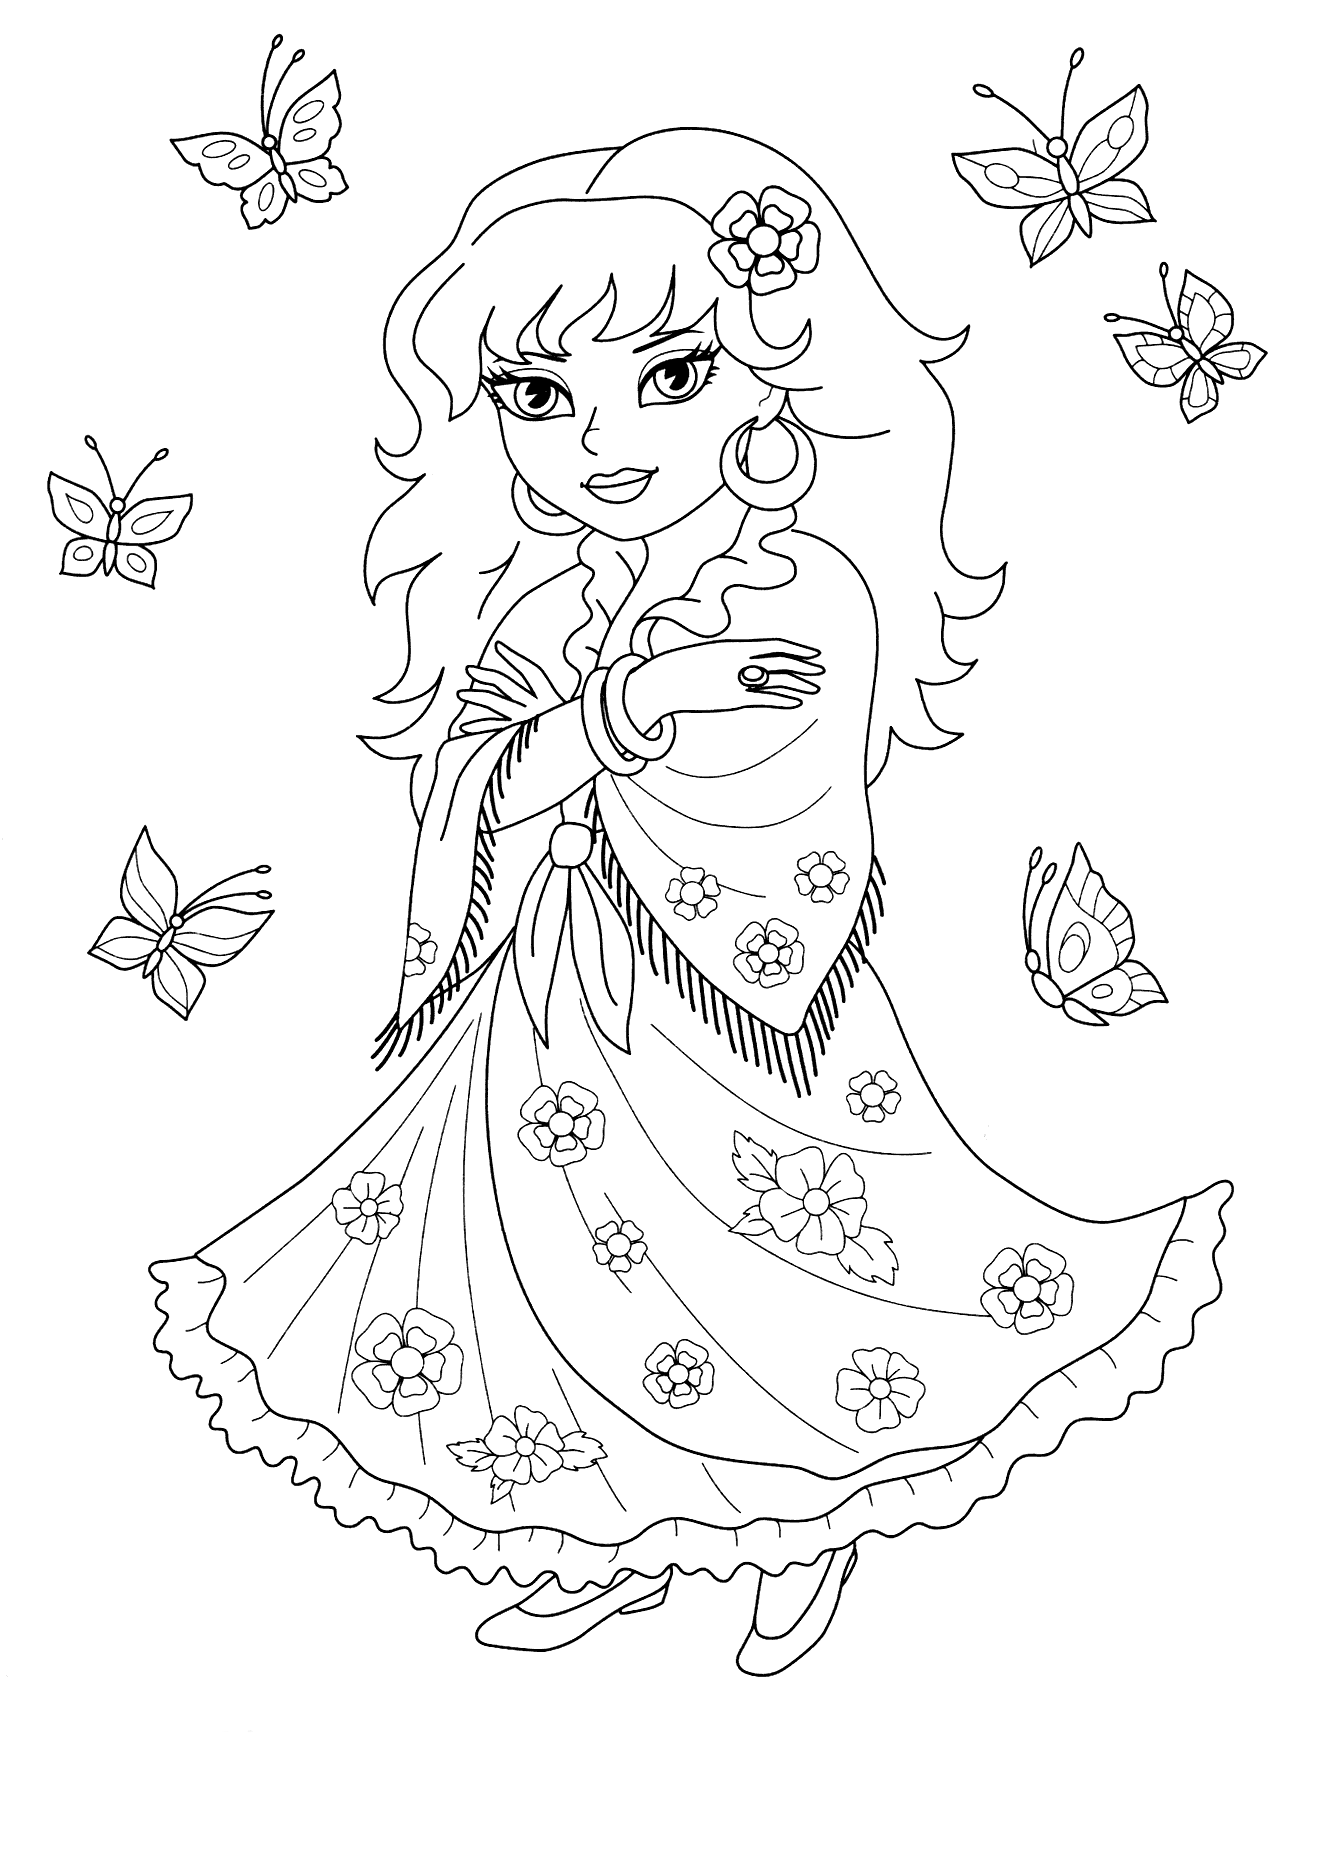 Coloring page - Gypsy Cassandra